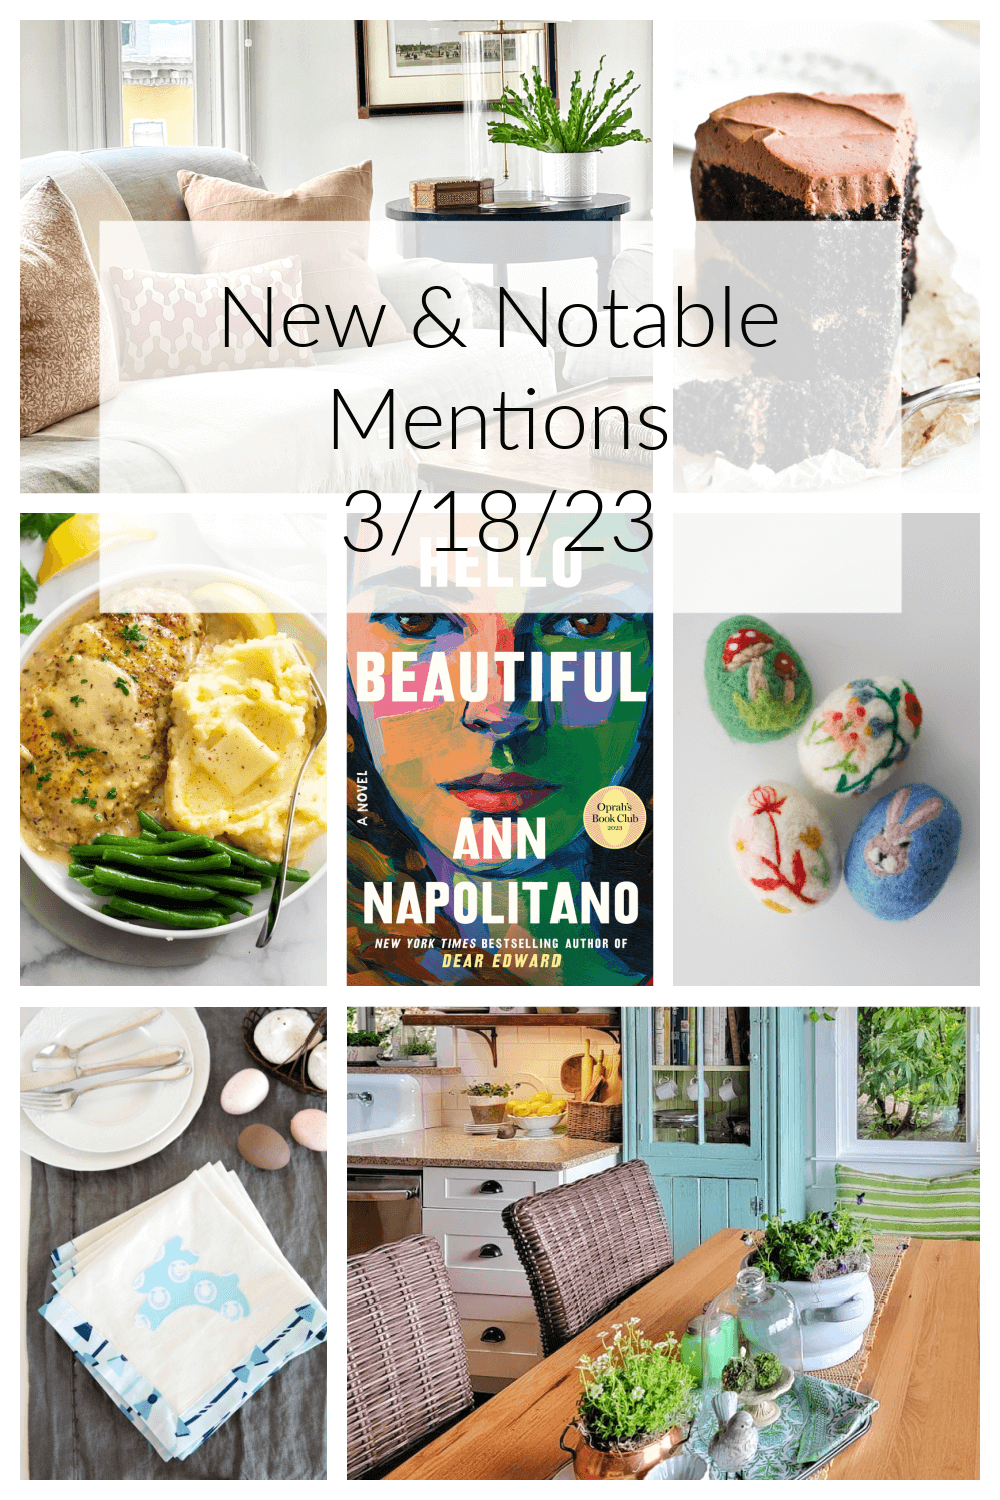 New & Notable Mentions 3/18/23